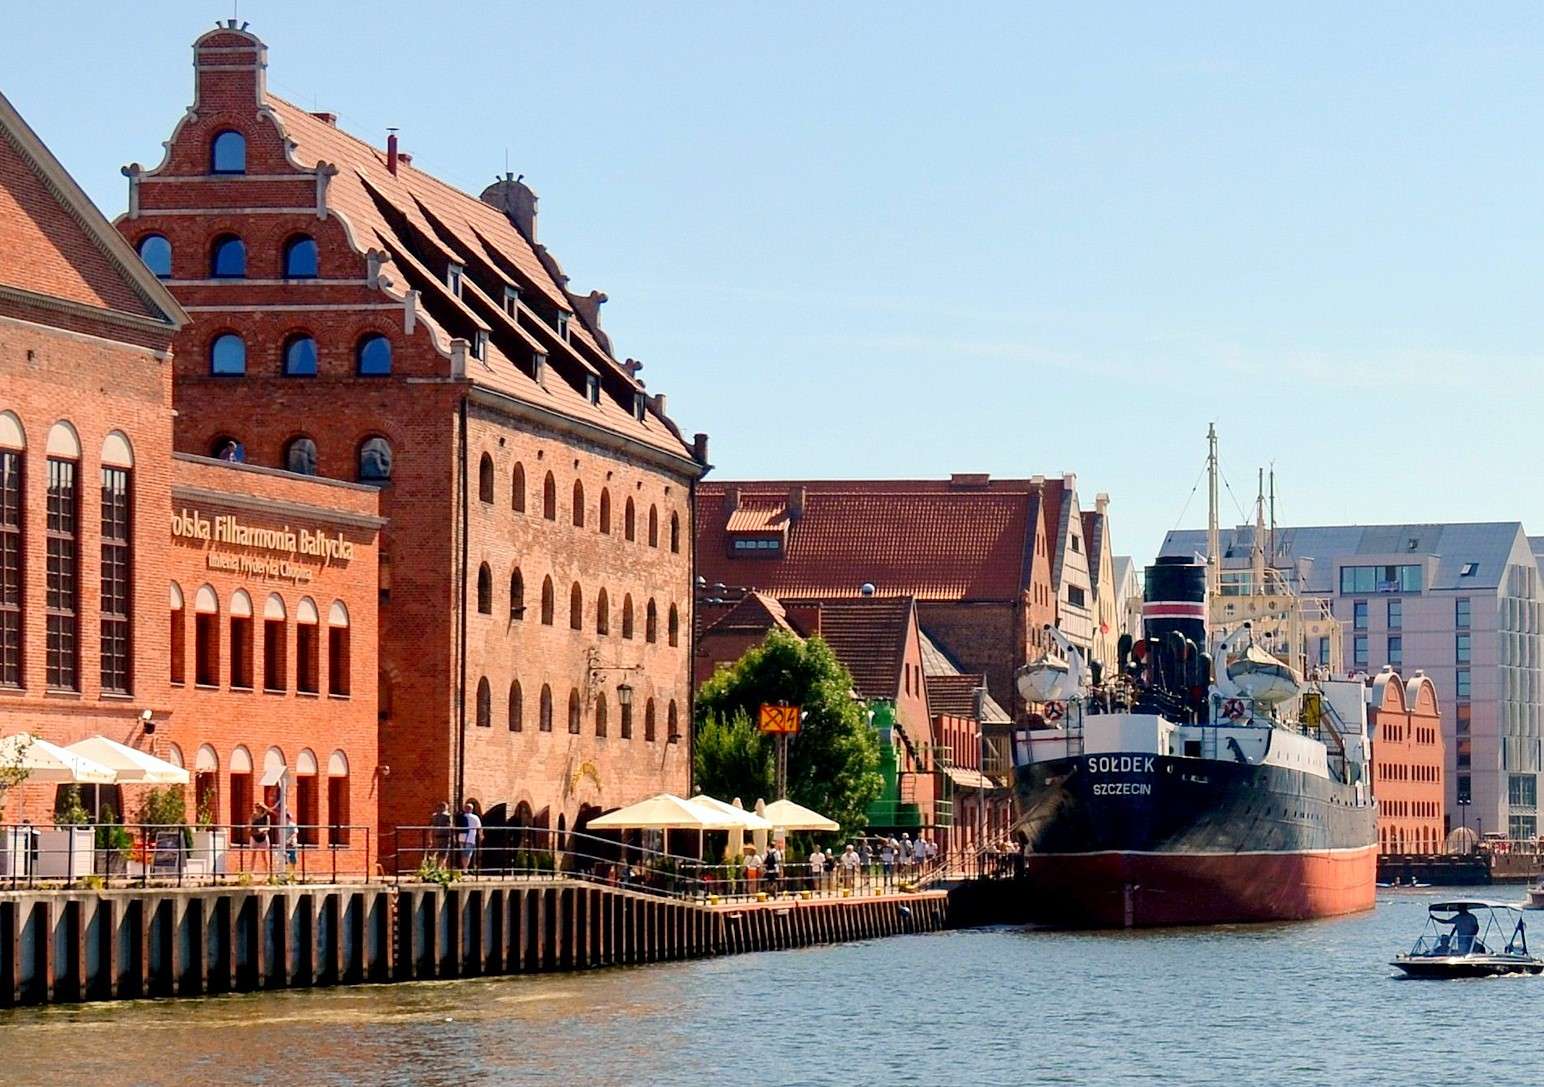 The Baltic Philharmonic and the Sołdek ship in Gdańsk online puzzle